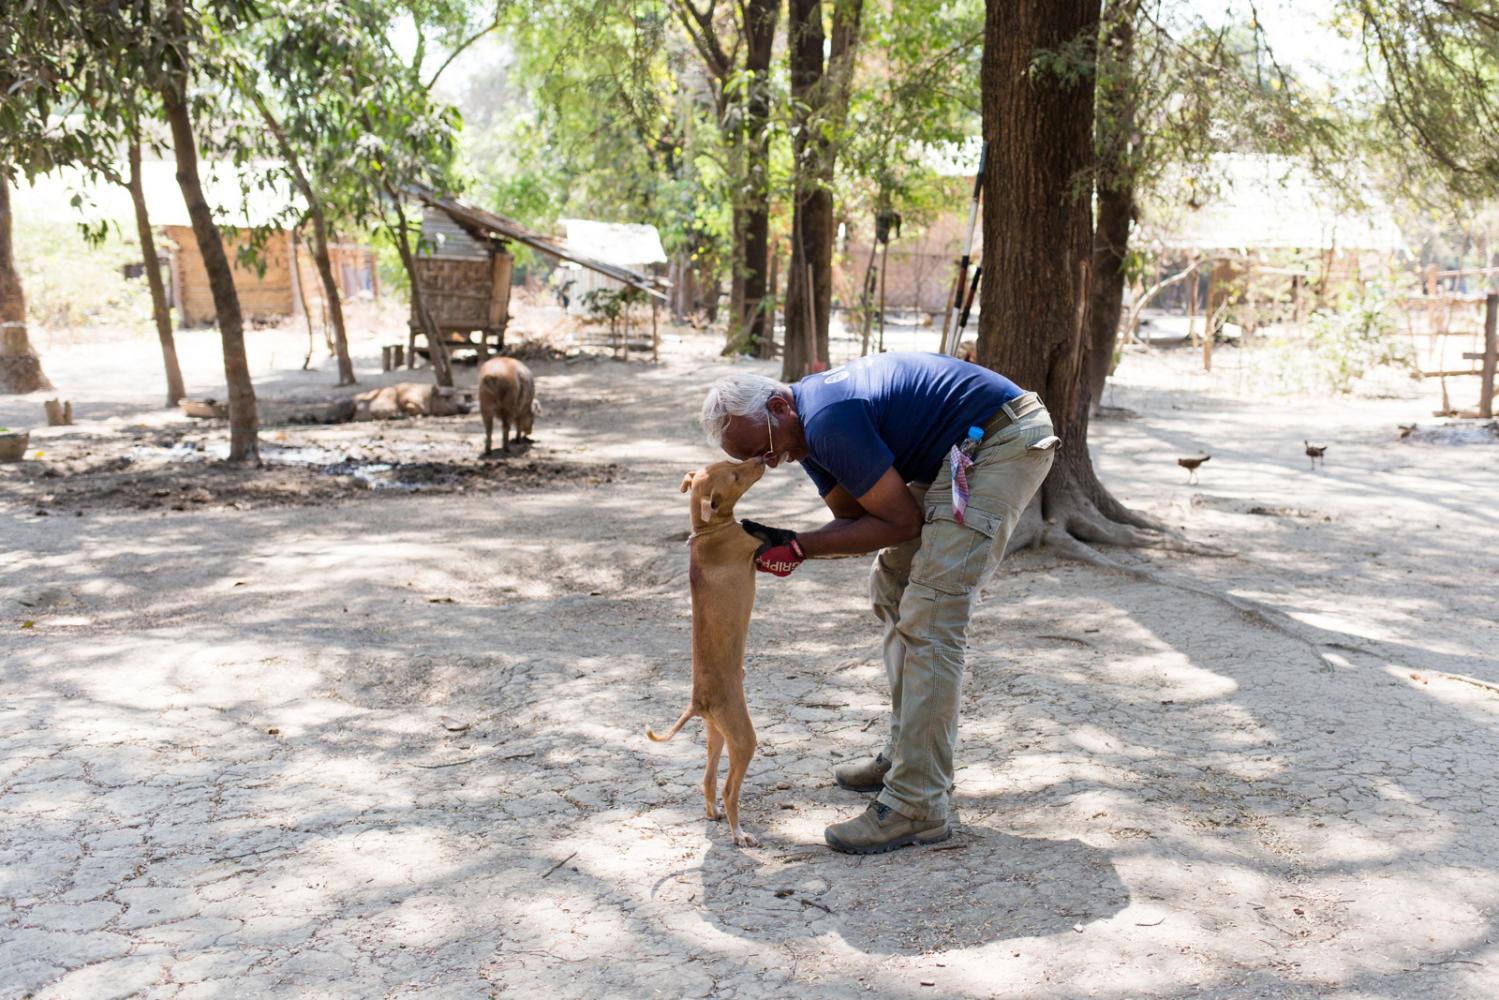 Image from Four Paws Rabies Campaign in Myanmar